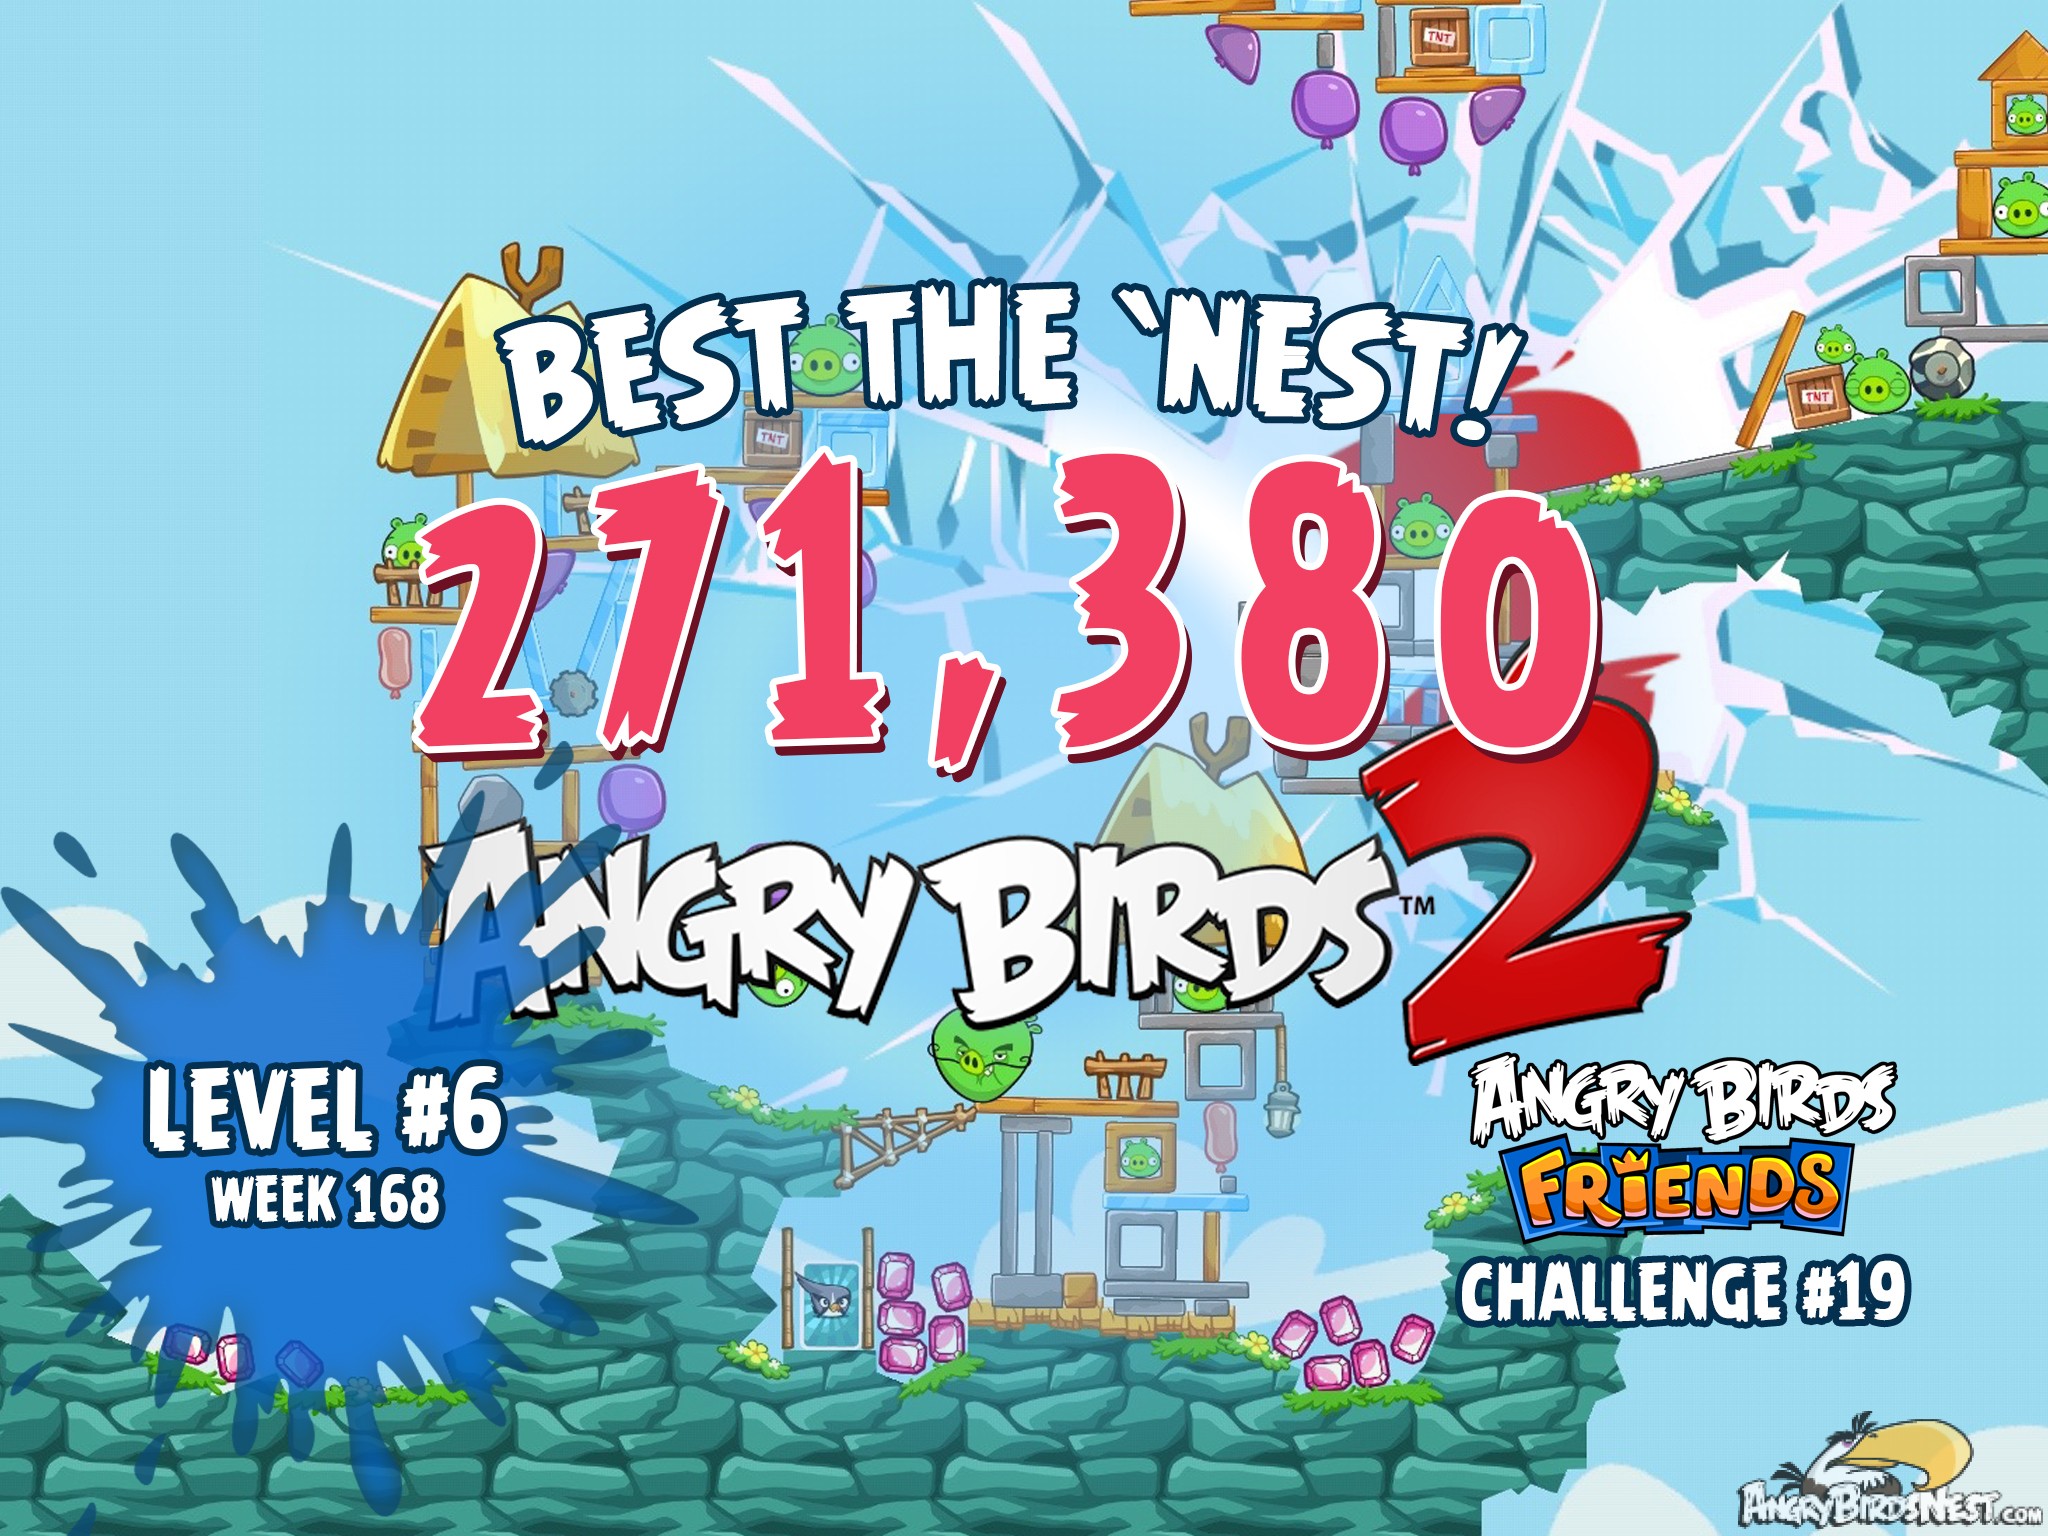 Angry Birds Friends Best the Nest Challenge Week 19